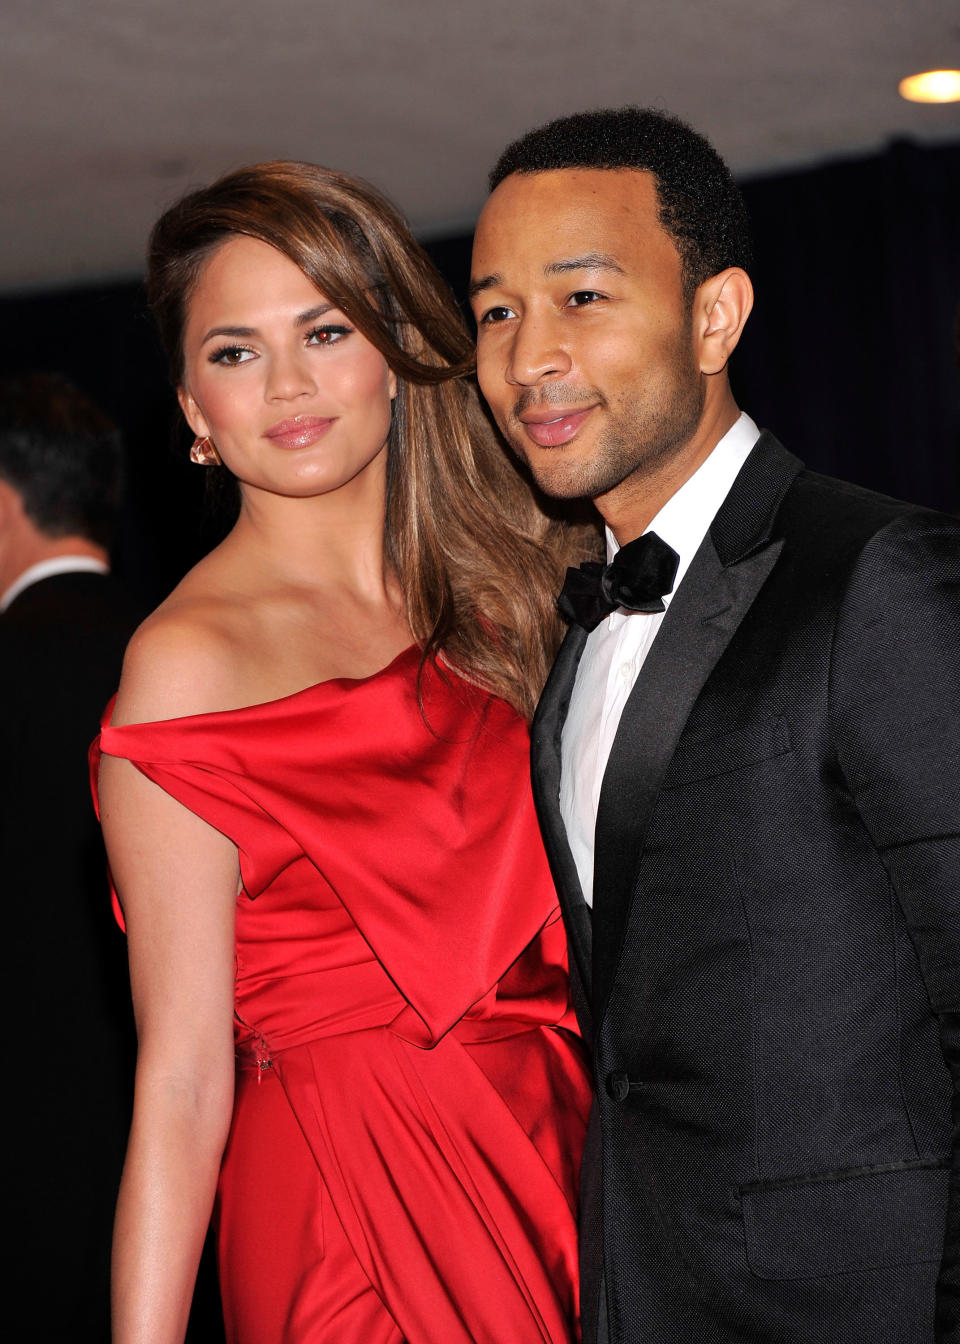 WASHINGTON, DC - APRIL 28:  John Legend and Chrissy Teigen attend the 98th Annual White House Correspondents' Association Dinner at the Washington Hilton on April 28, 2012 in Washington, DC.  (Photo by Stephen Lovekin/Getty Images)